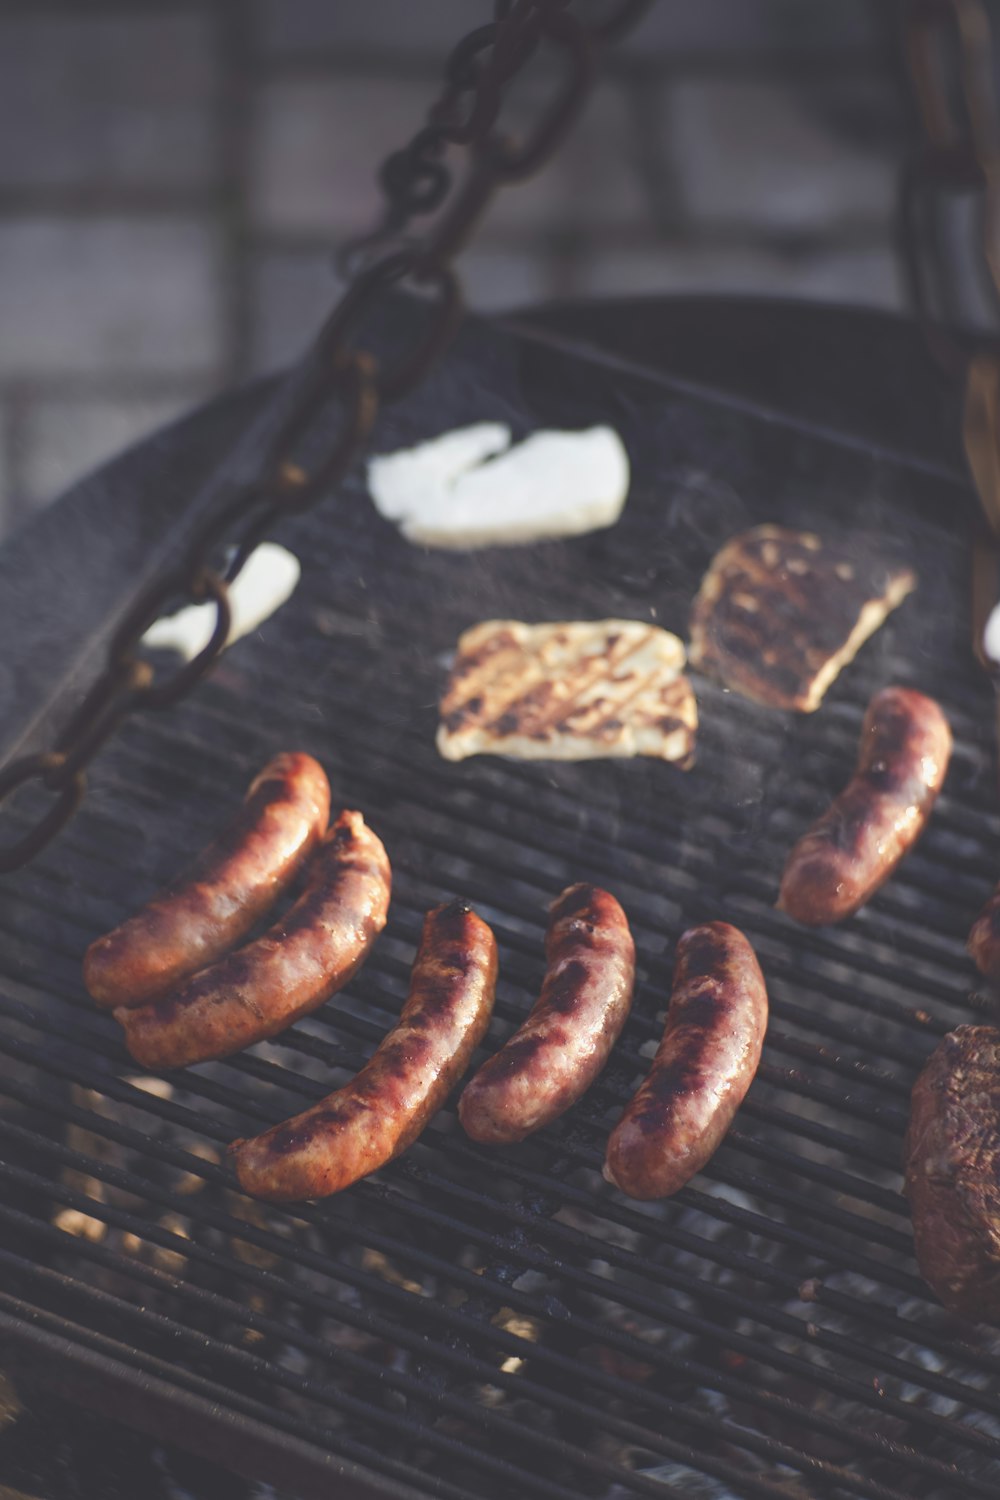 a grill with sausages and other foods cooking on it